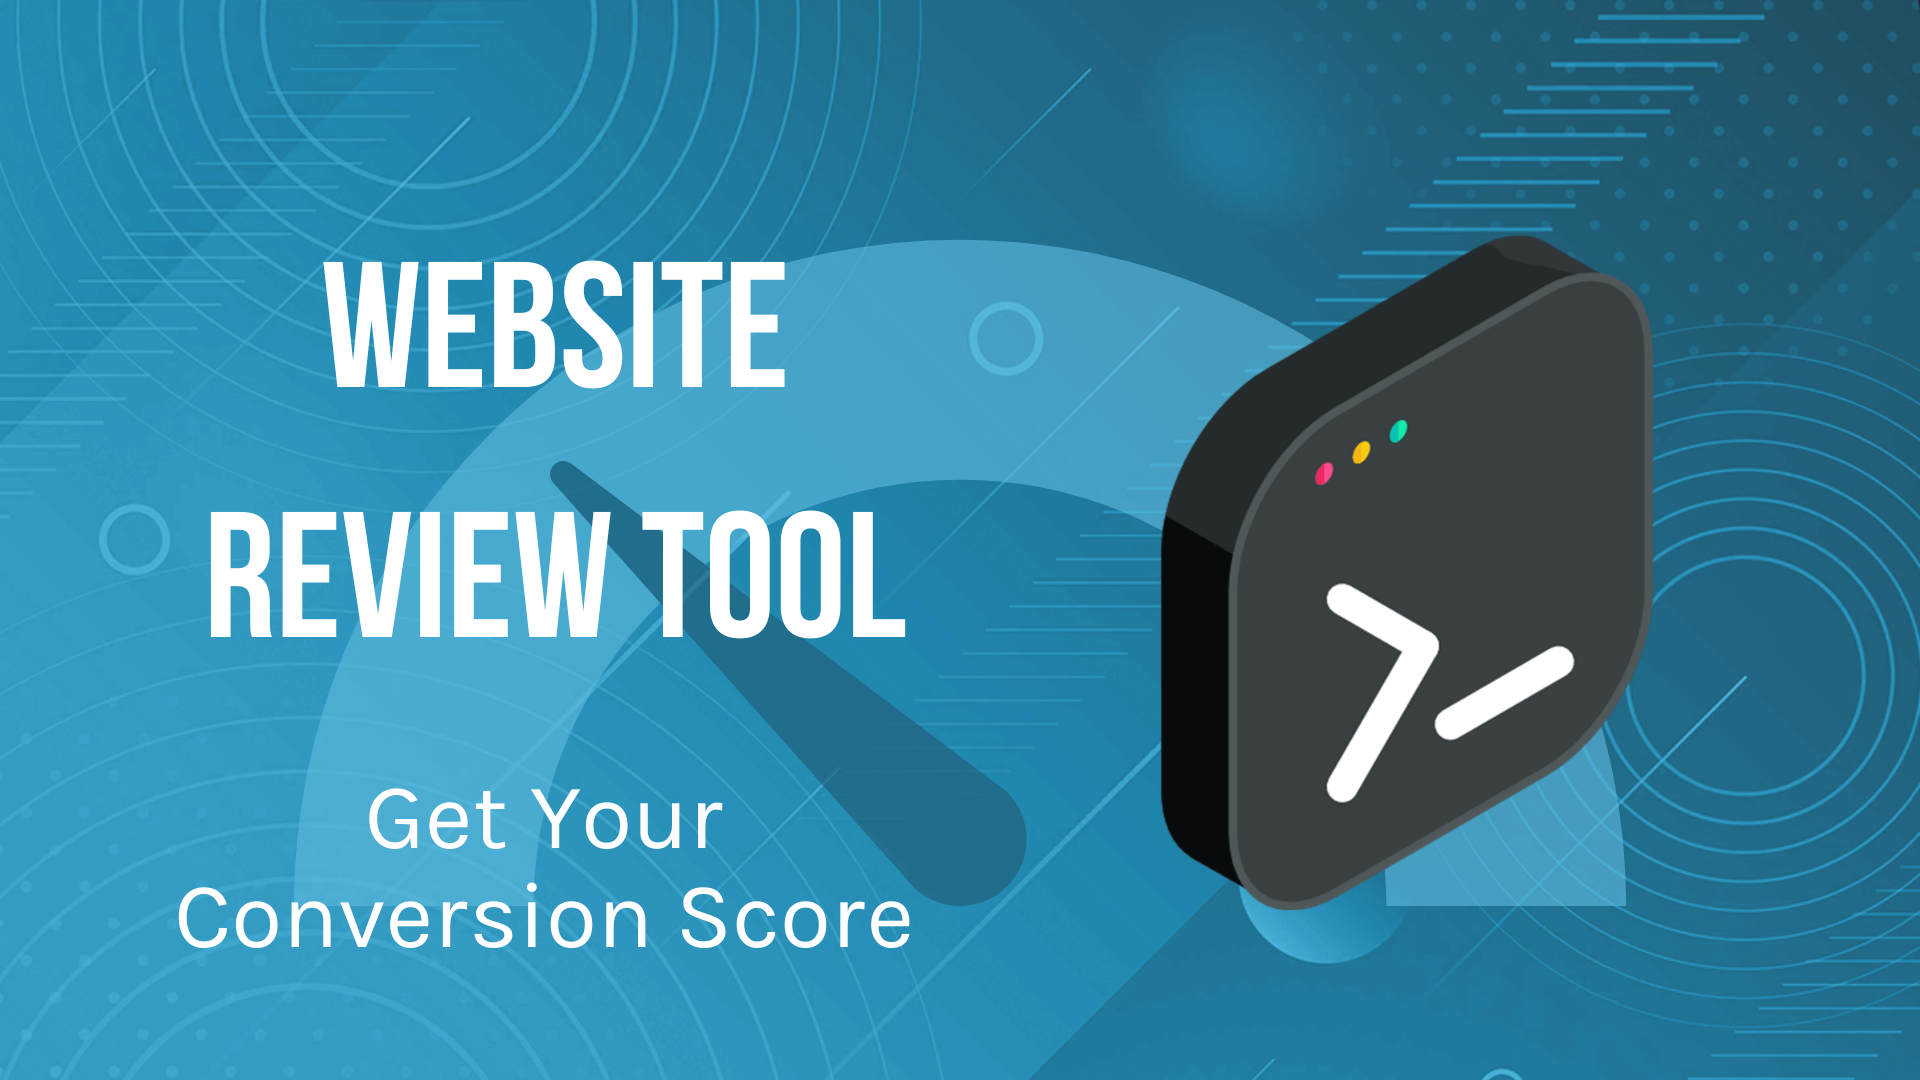 Website review tool with conversion score to assess website performance and user experience